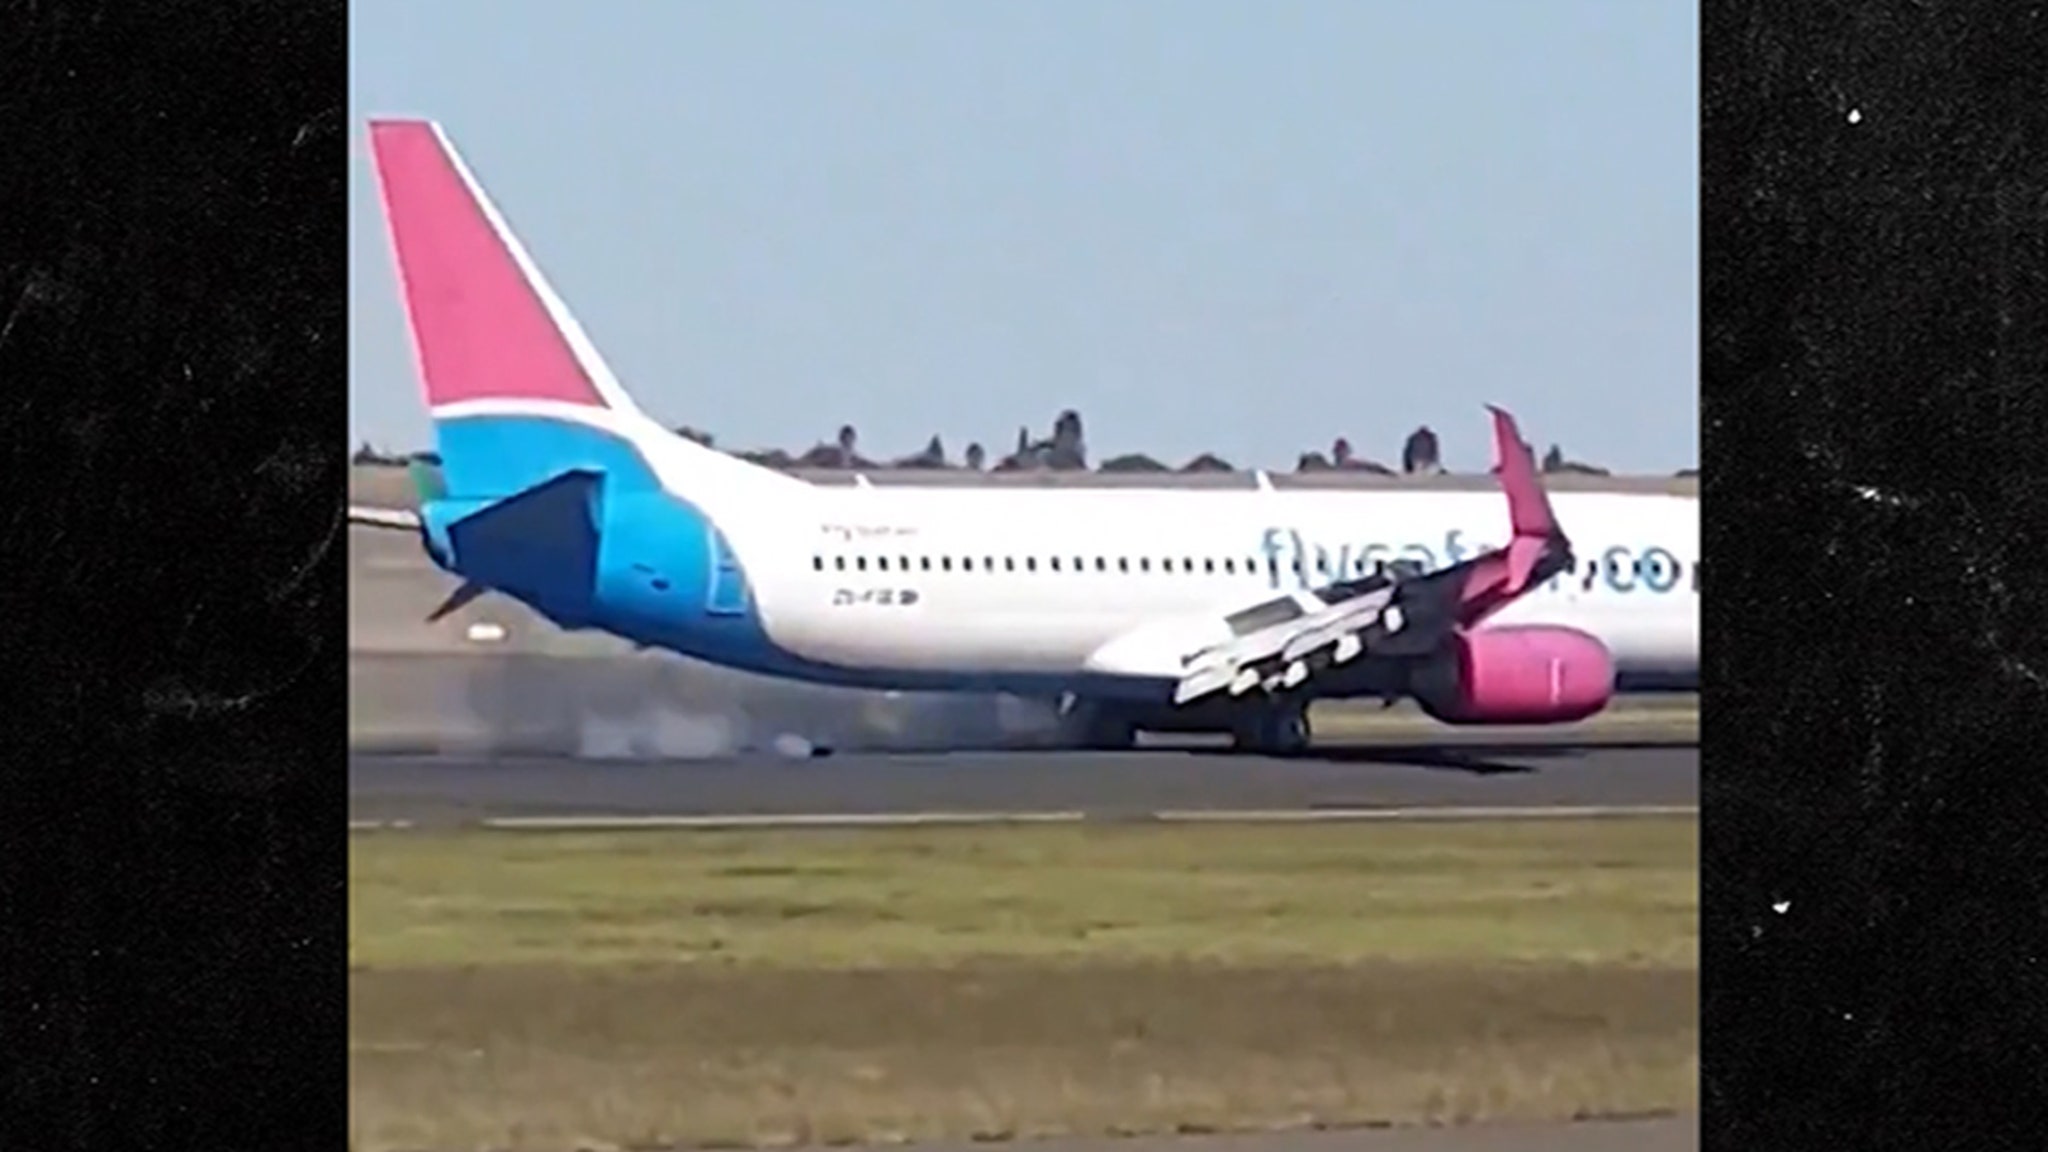 Boeing Jet Makes Emergency Landing in South Africa, Video Shows